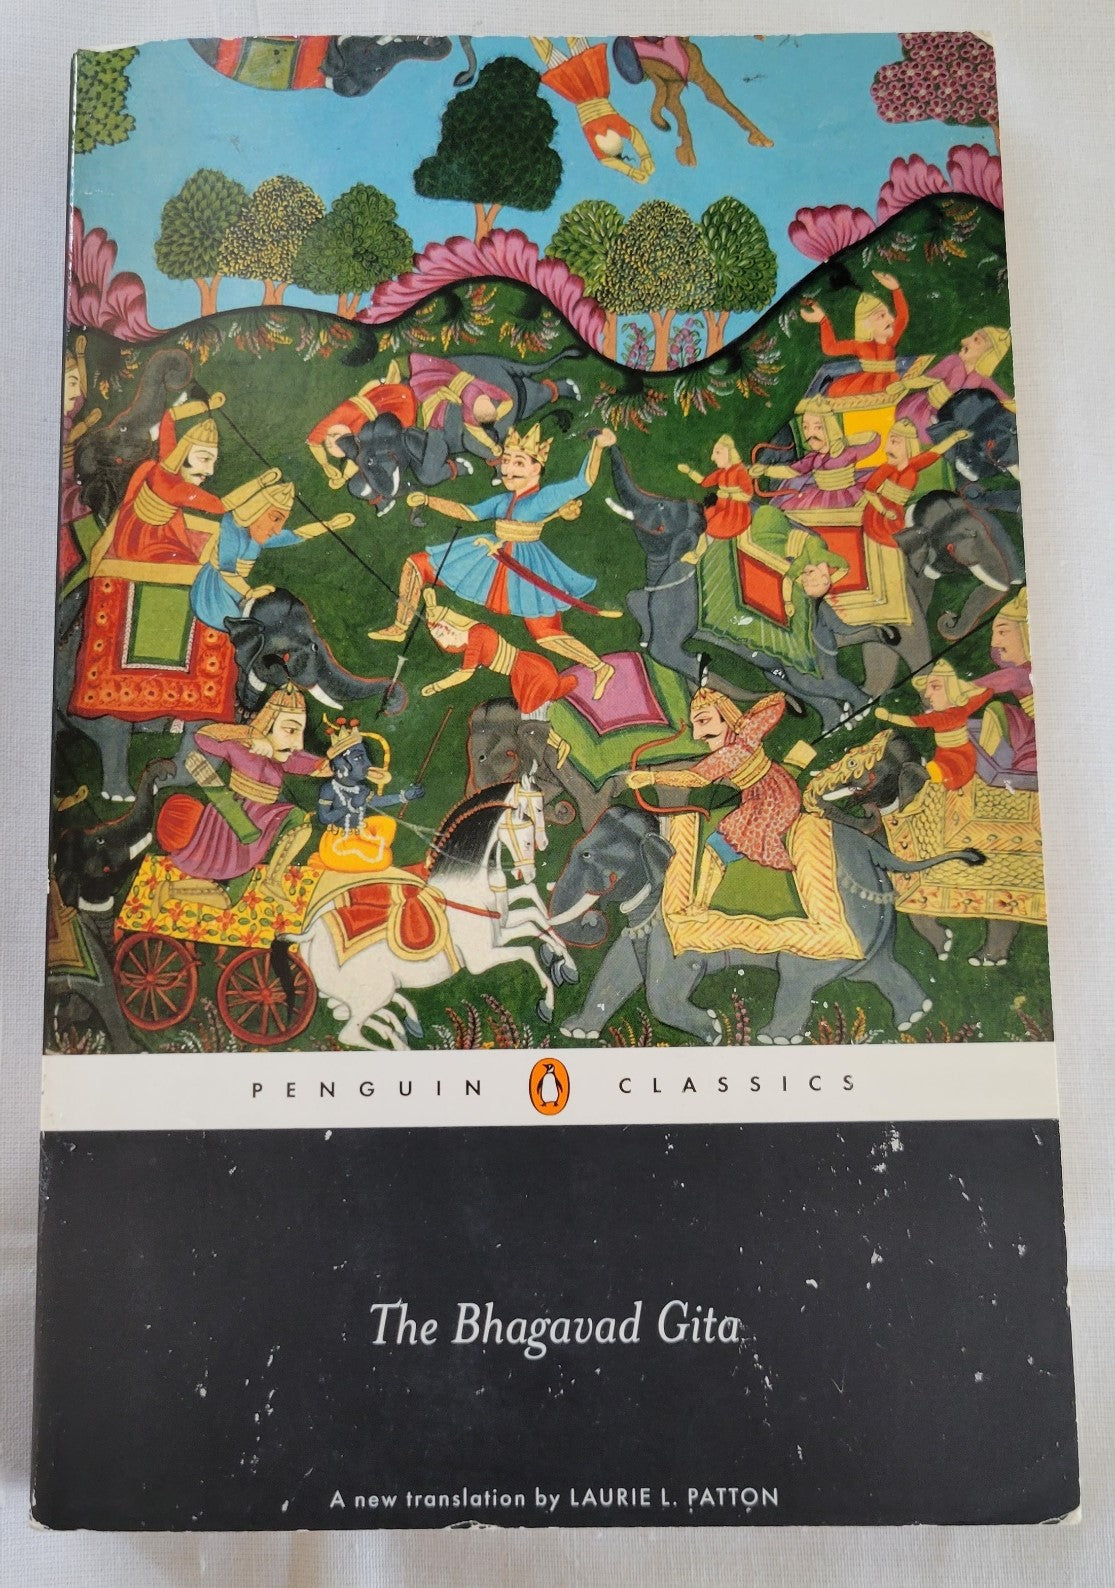 Used book for sale “The Bhagavad Gita” Hindu epic translated by Laurie L. Patton. Front cover.